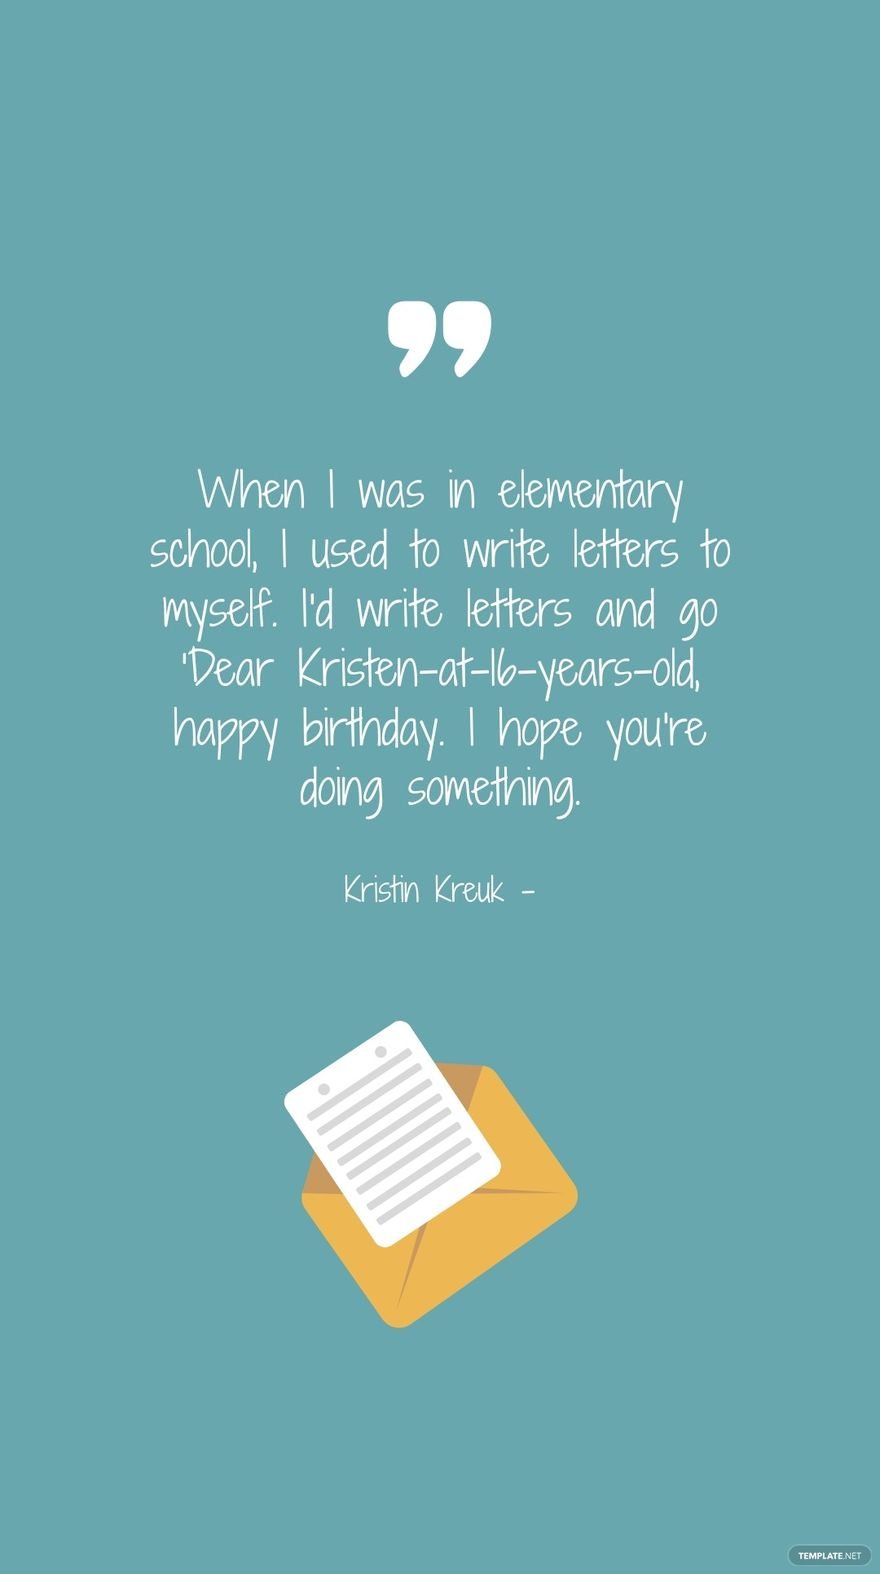 Free Kristin Kreuk - When I was in elementary school, I used to write letters to myself. I'd write letters and go 'Dear Kristen-at-16-years-old, happy birthday. I hope you're doing something. in JPG